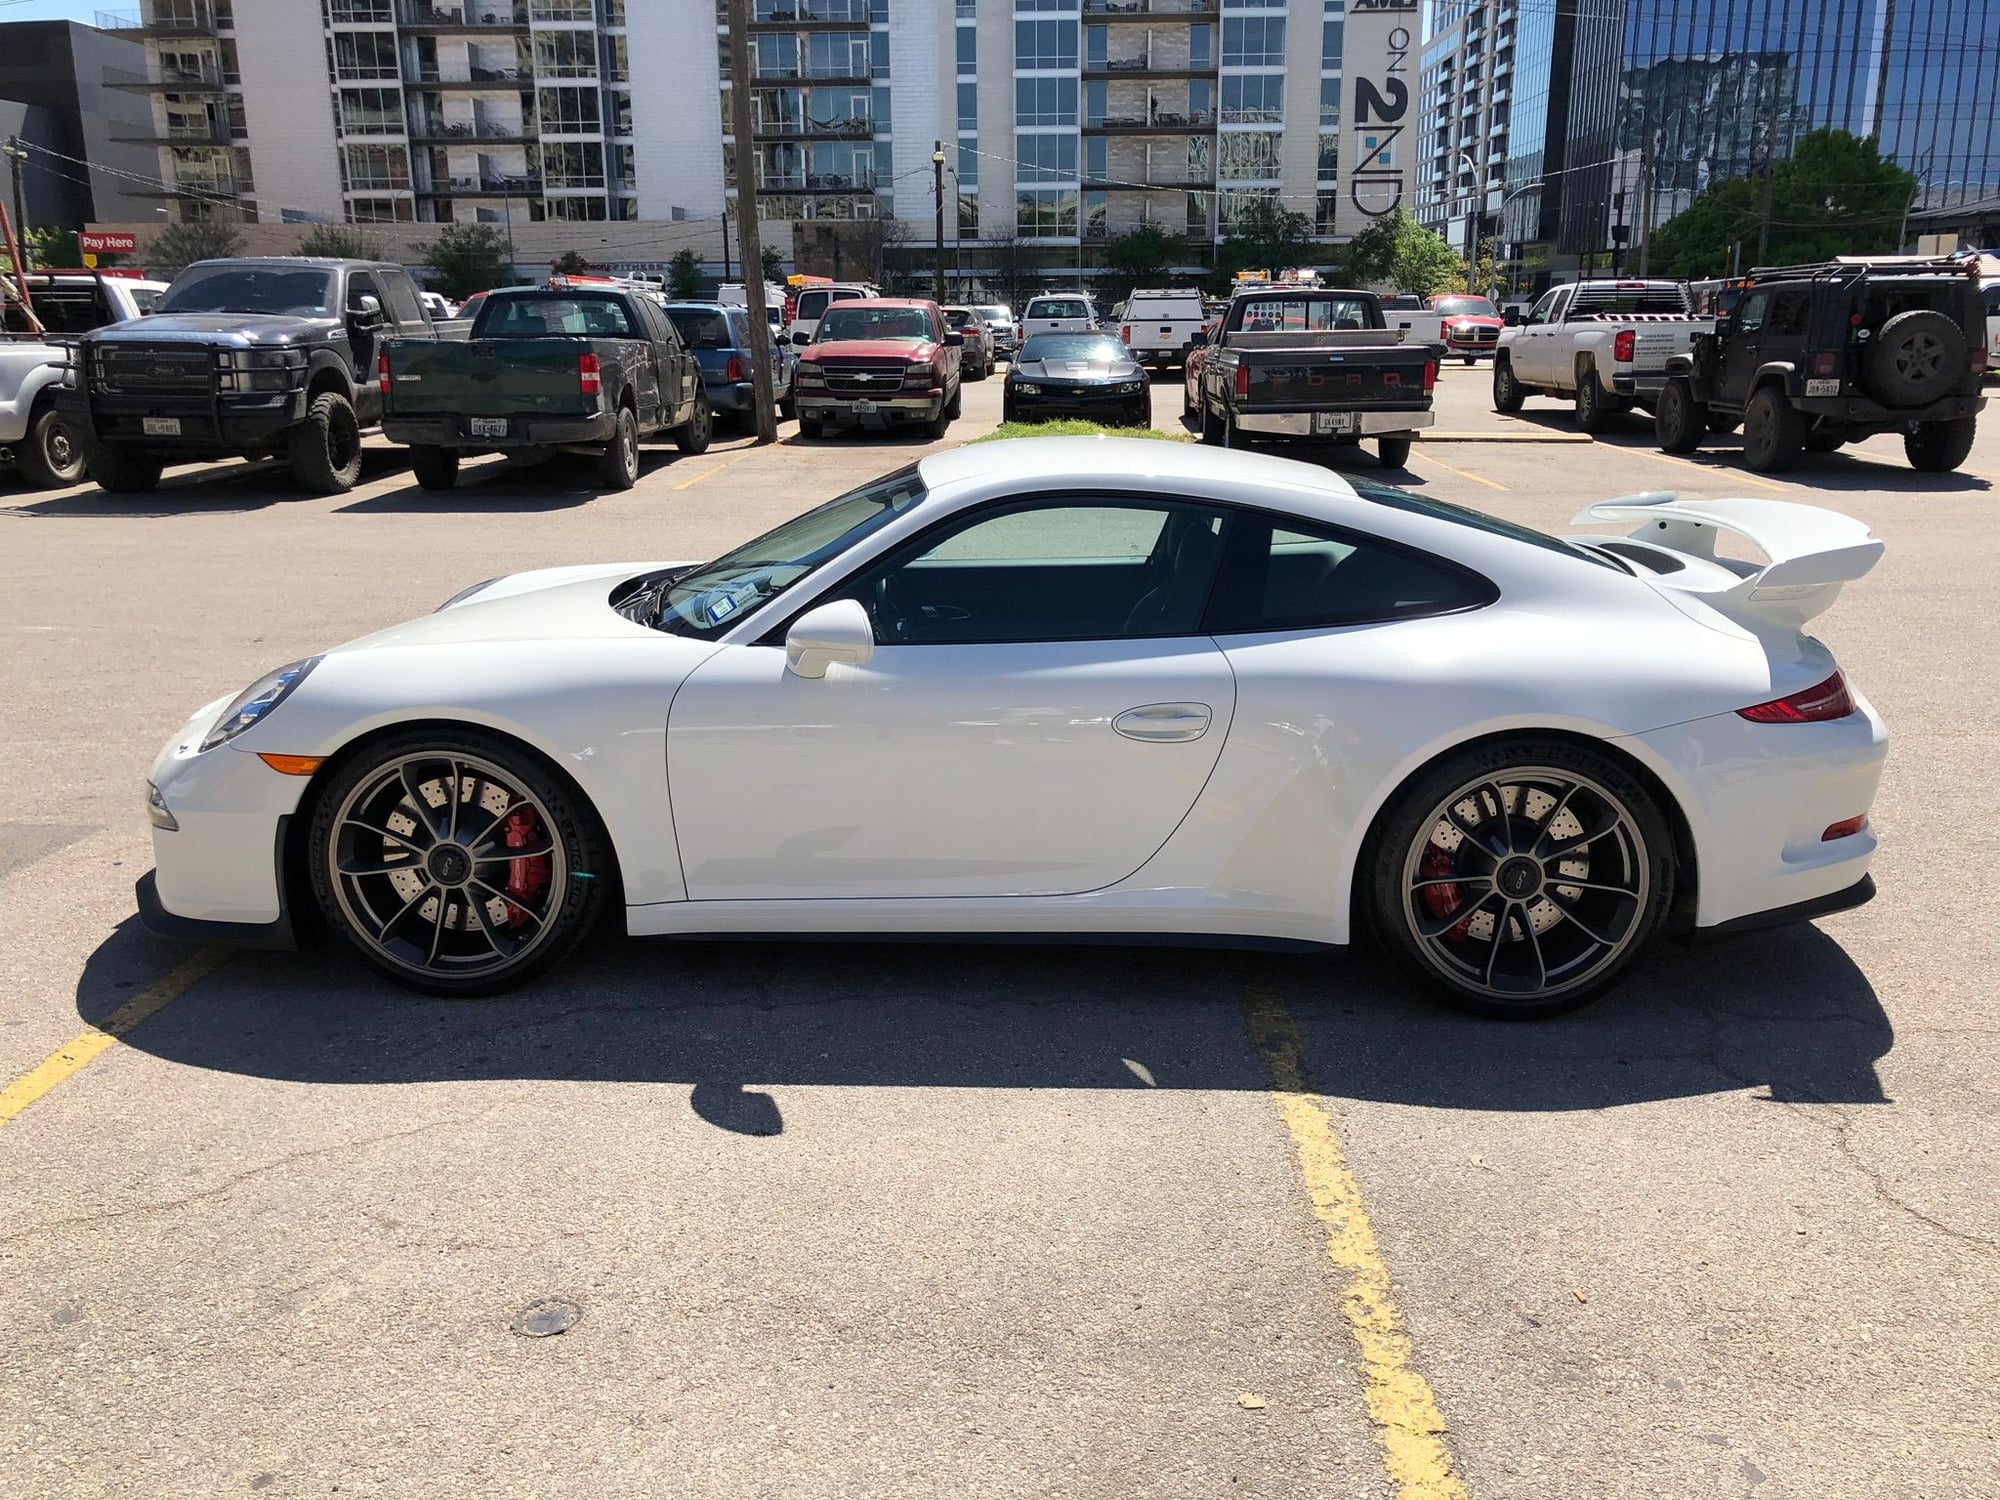 2015 Porsche GT3 - 2015 Porsche 911 GT3, 5,965 miles, original owner, and perfect condition - Used - VIN WP0AC2A98FS184119 - 5,965 Miles - 6 cyl - 2WD - Automatic - Coupe - White - Austin, TX 78701, United States